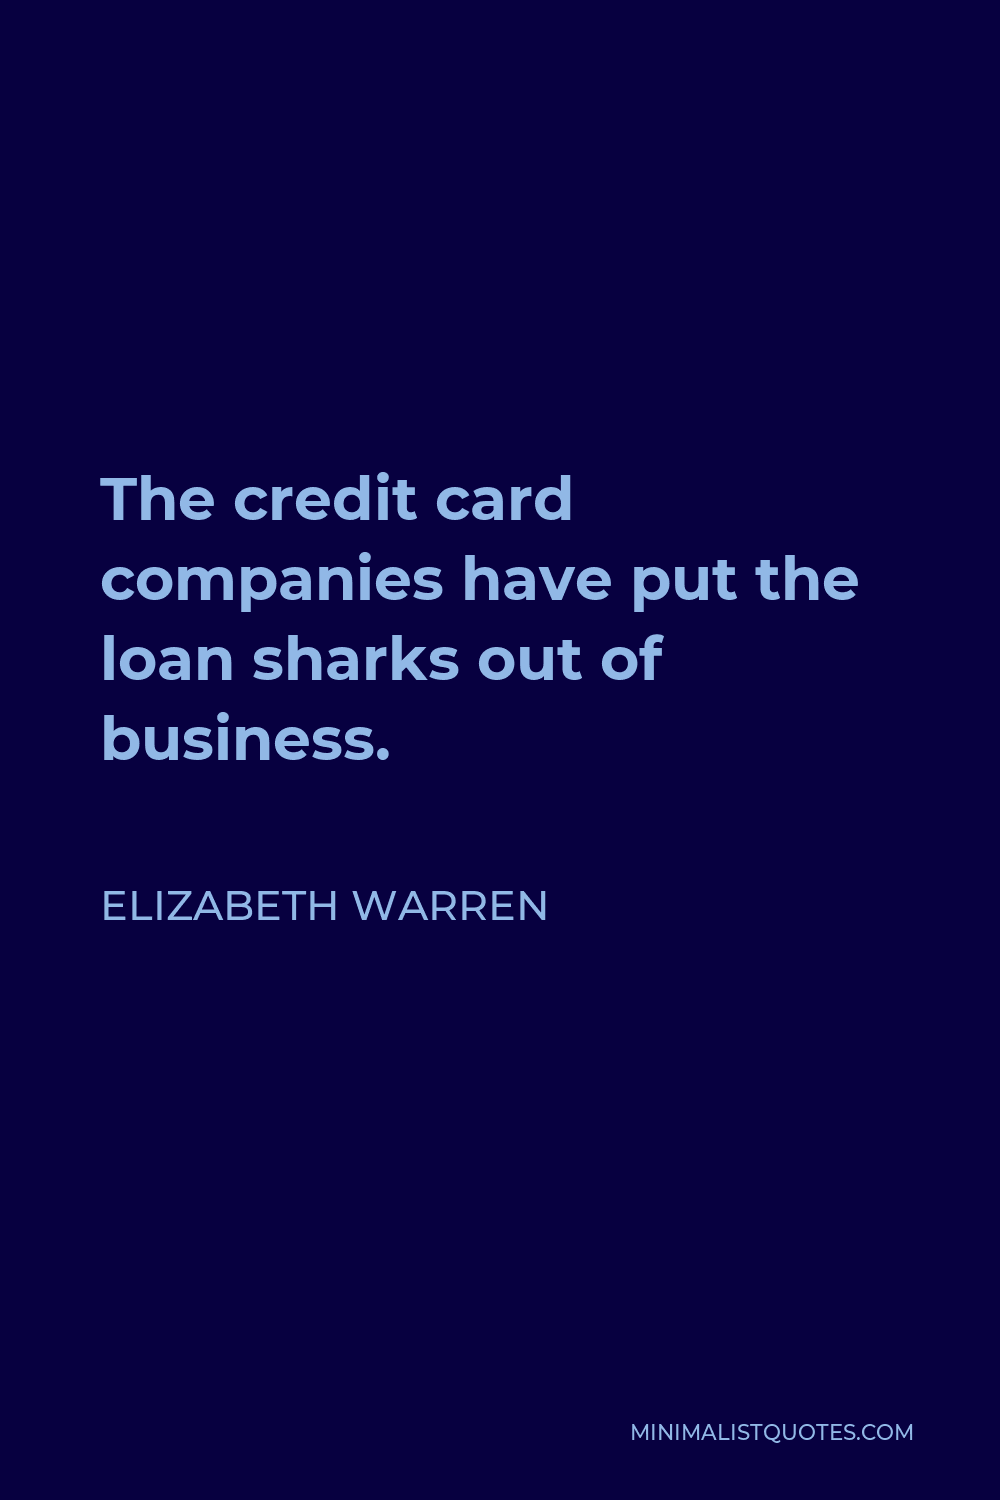 Elizabeth Warren Quote - The credit card companies have put the loan sharks out of business.